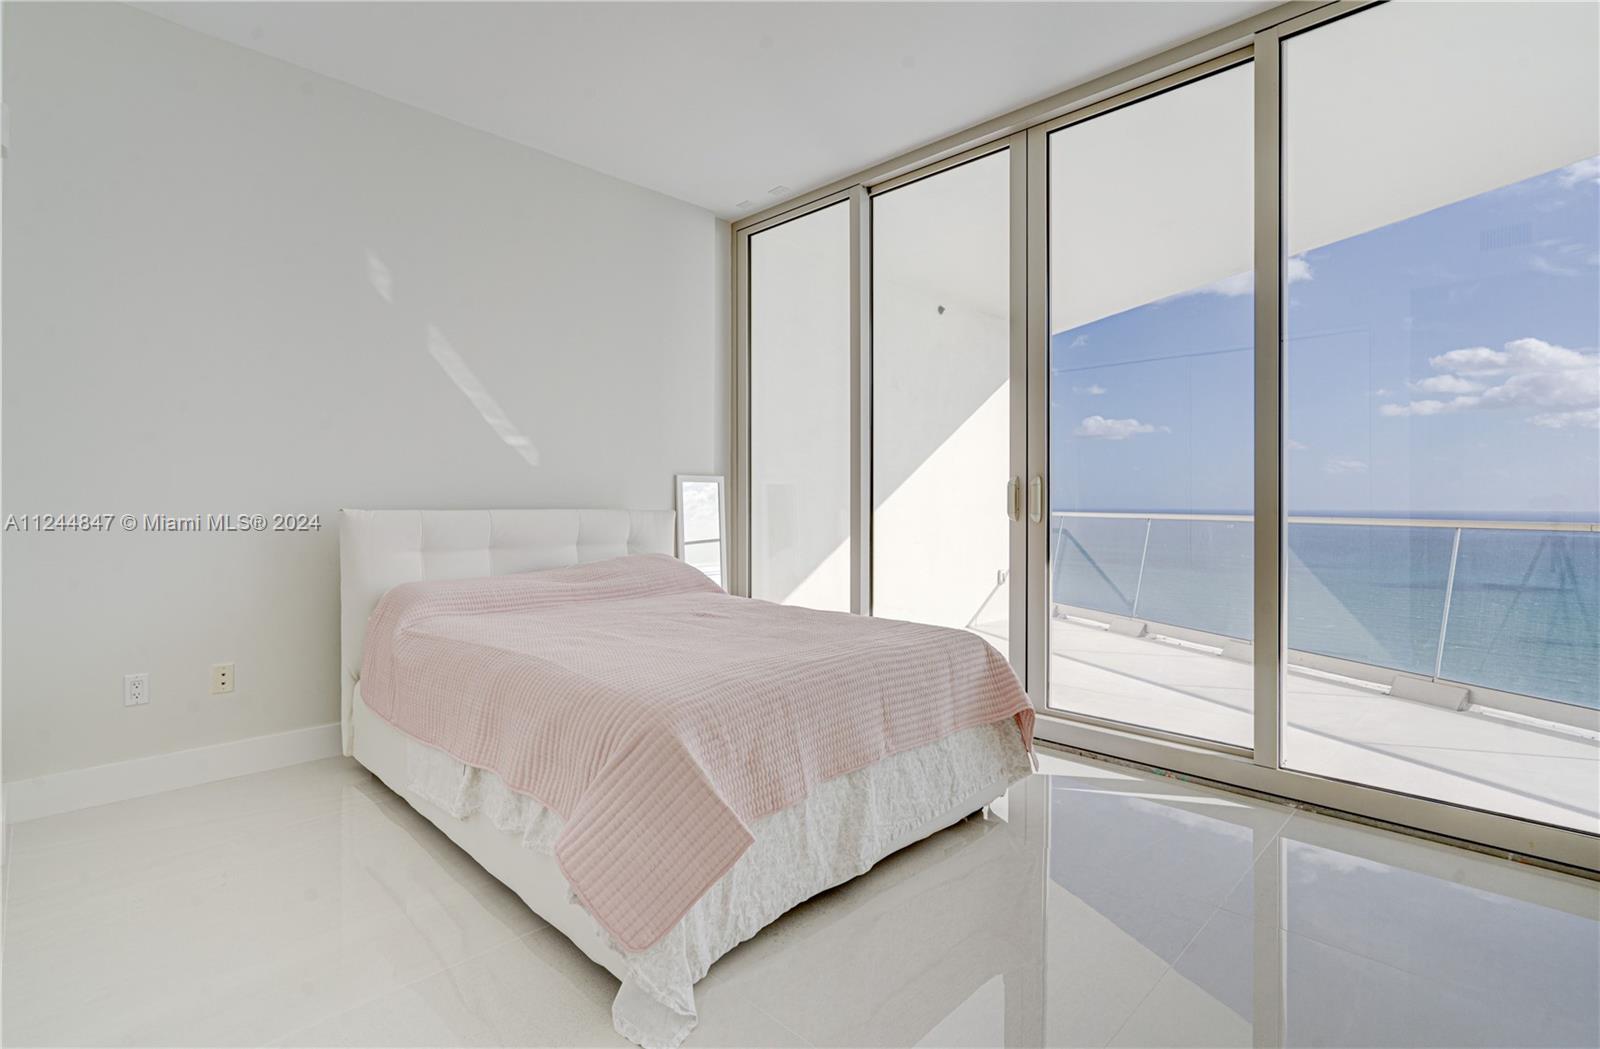 2ND BEDROOM WITH DIRECT OCEAN VIEWS